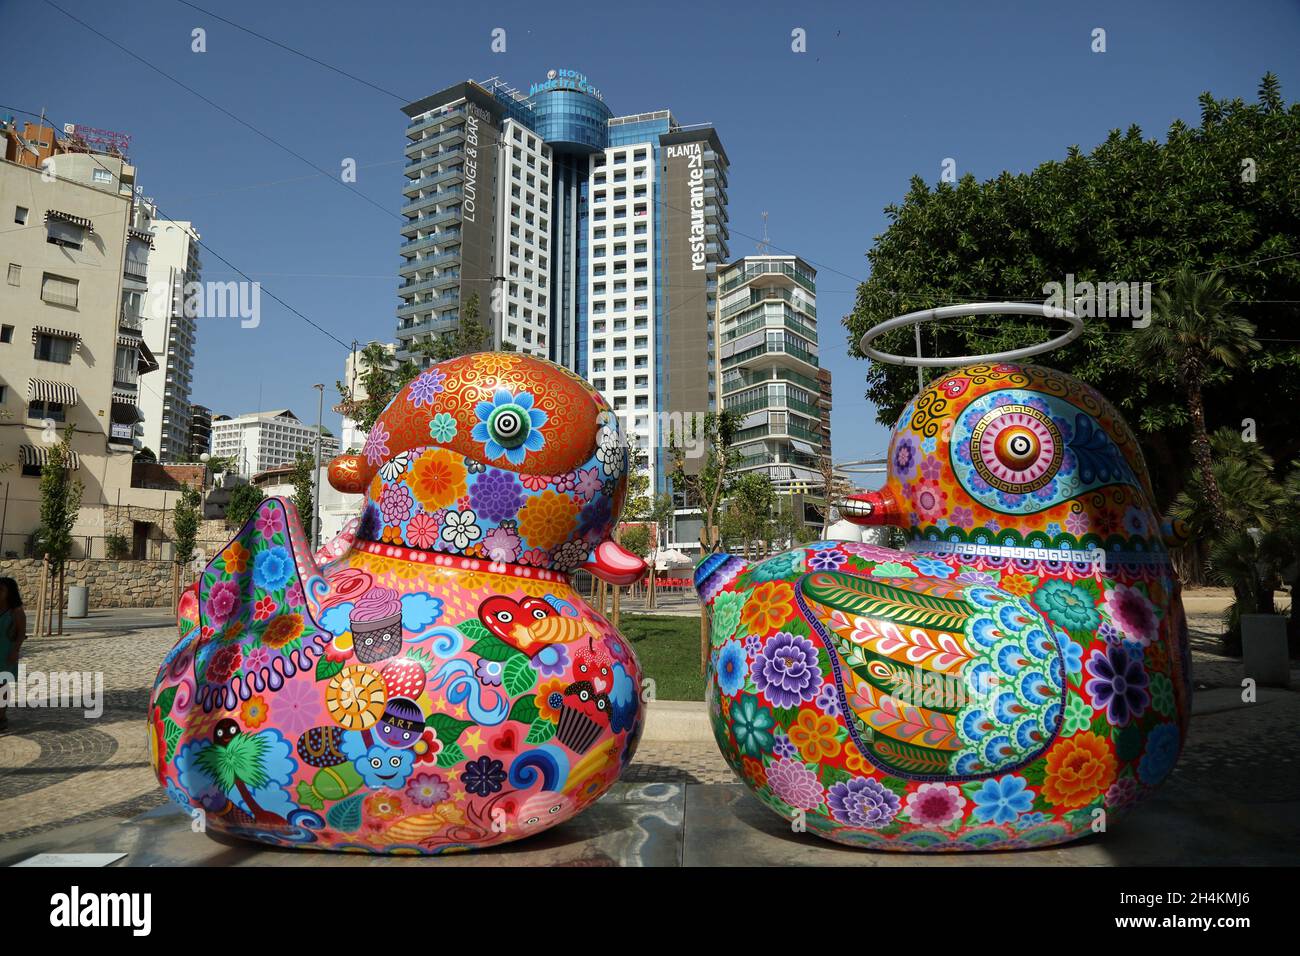 Sculptures by the Taiwanese artist Hung Yi, Benidorm, Valencian Community, Spain Stock Photo